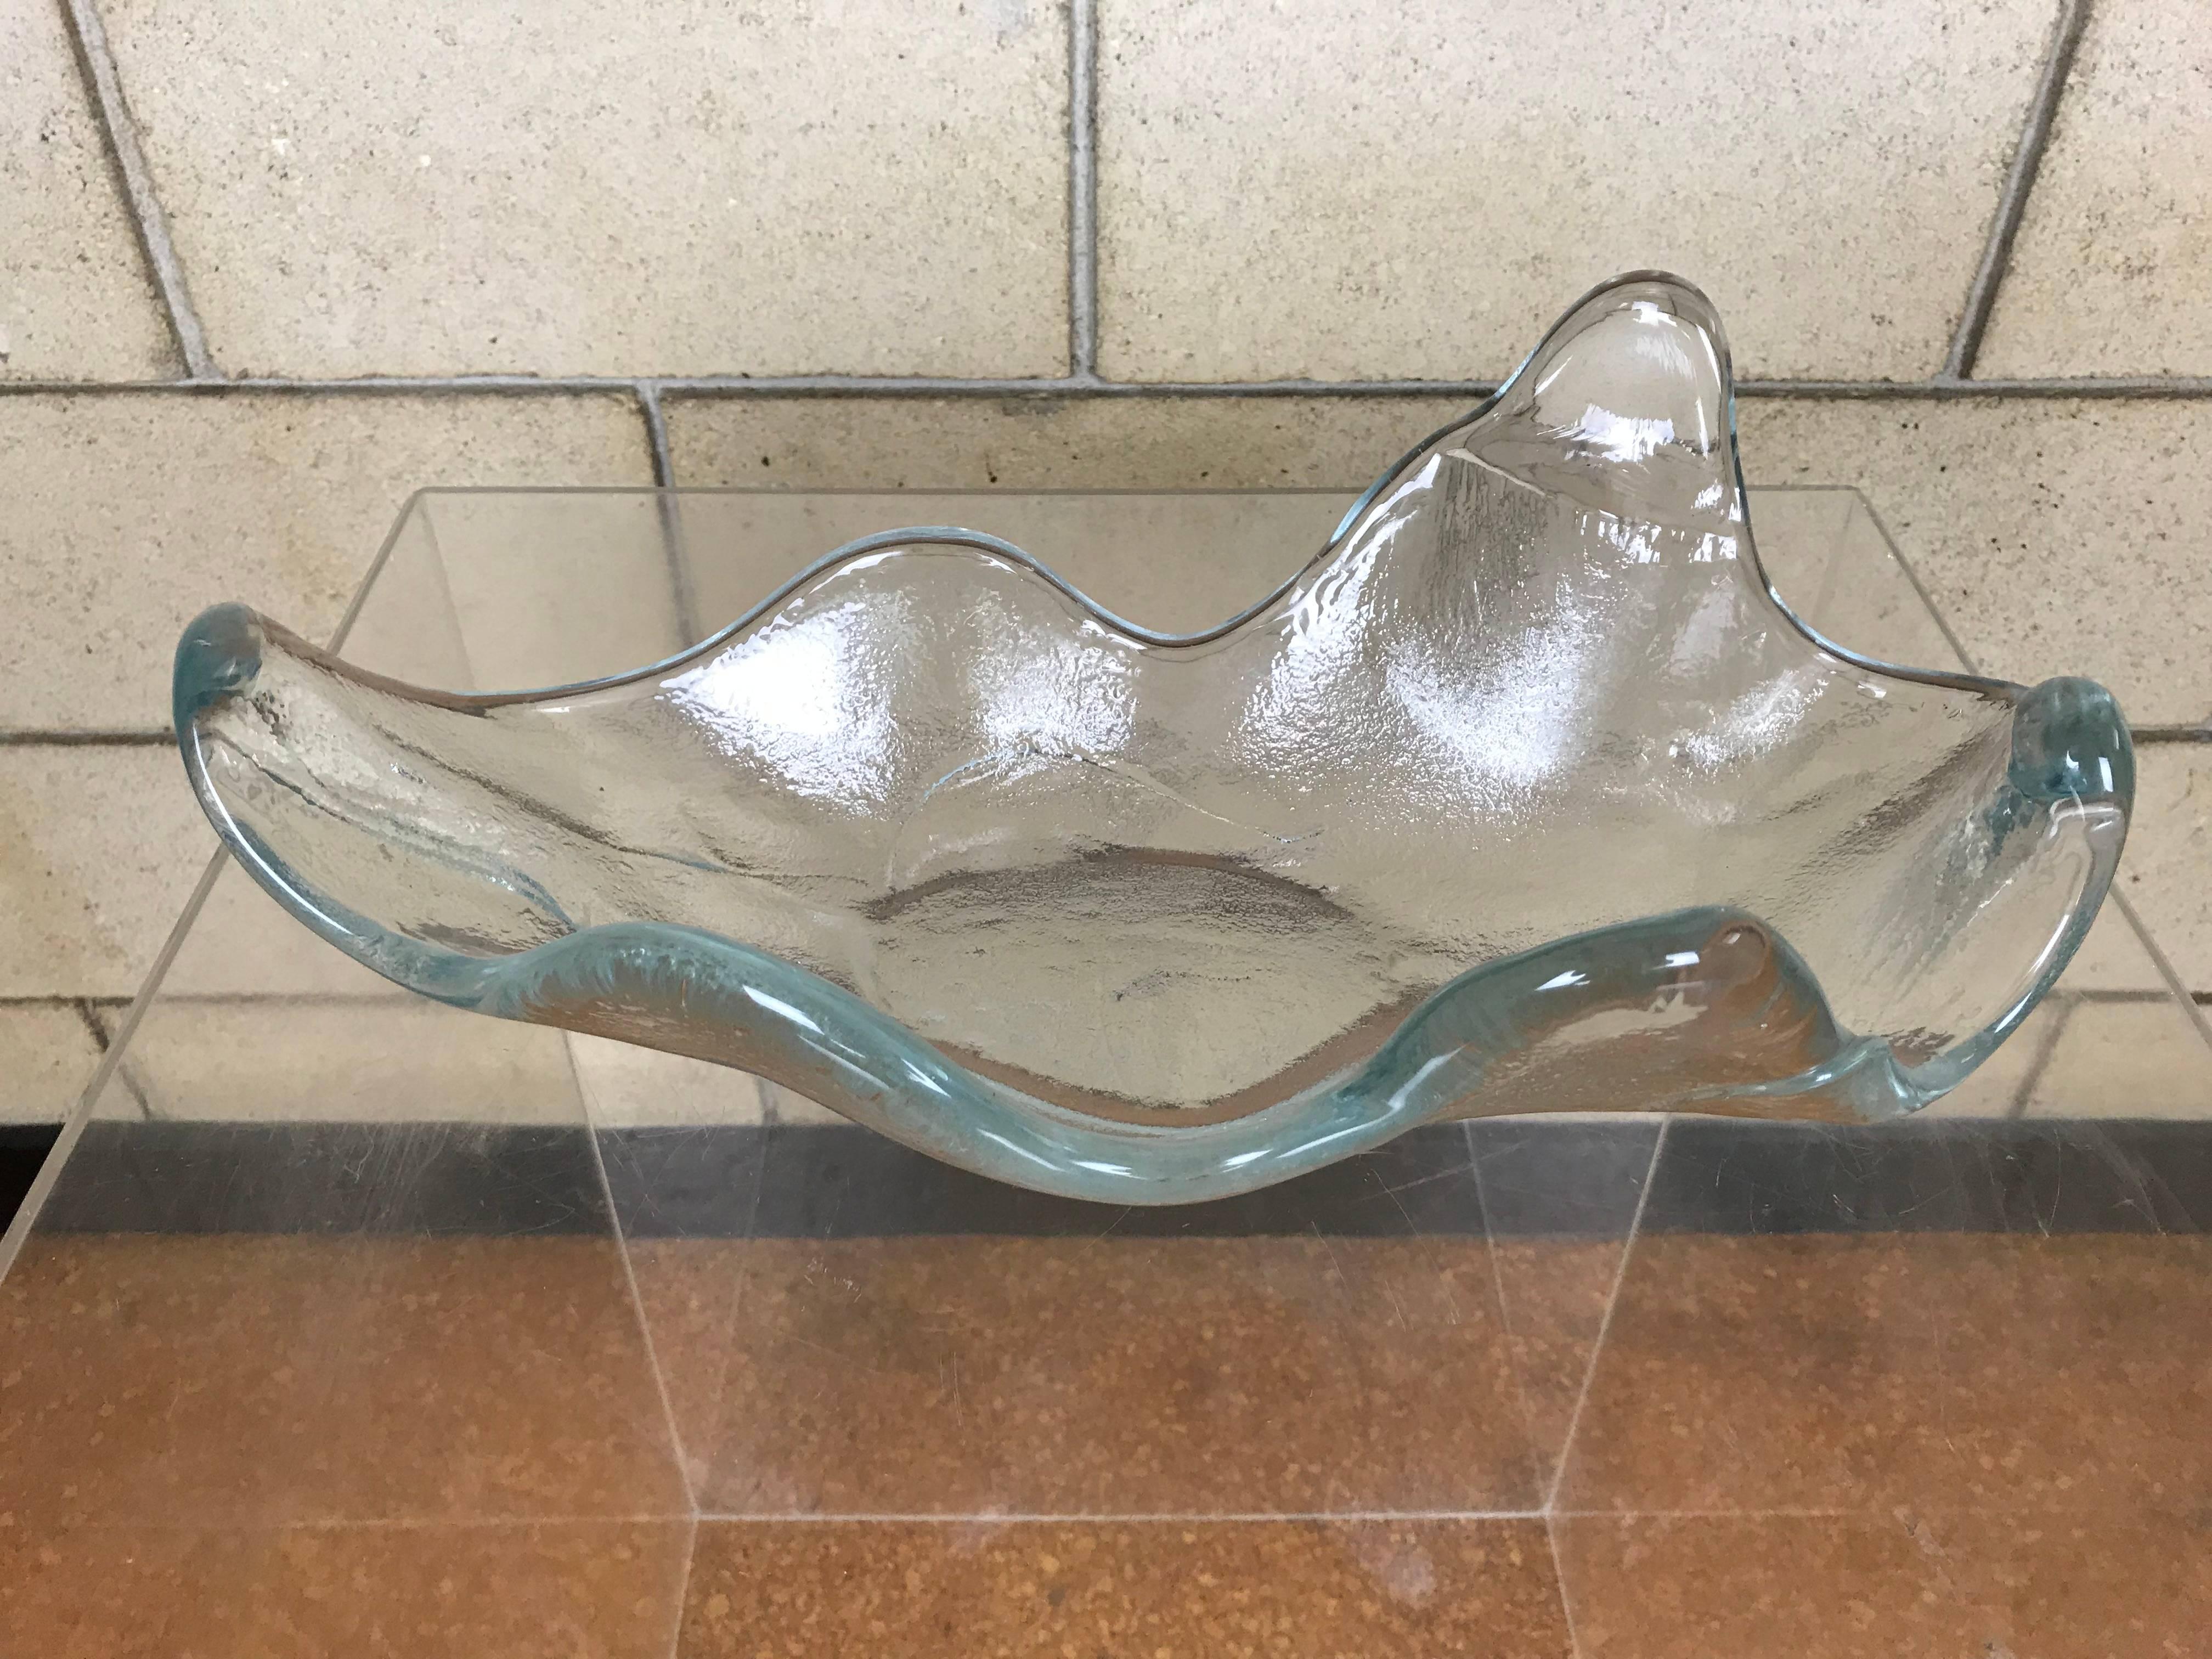 Beautiful large biomorphic handblown abstract thick glass bowl by Blenko, circa 1965. The bowl is in excellent condition with no chips or cracks. Underneath you can see the pontil mark. All lines you see are meant to be there, and are undulations in